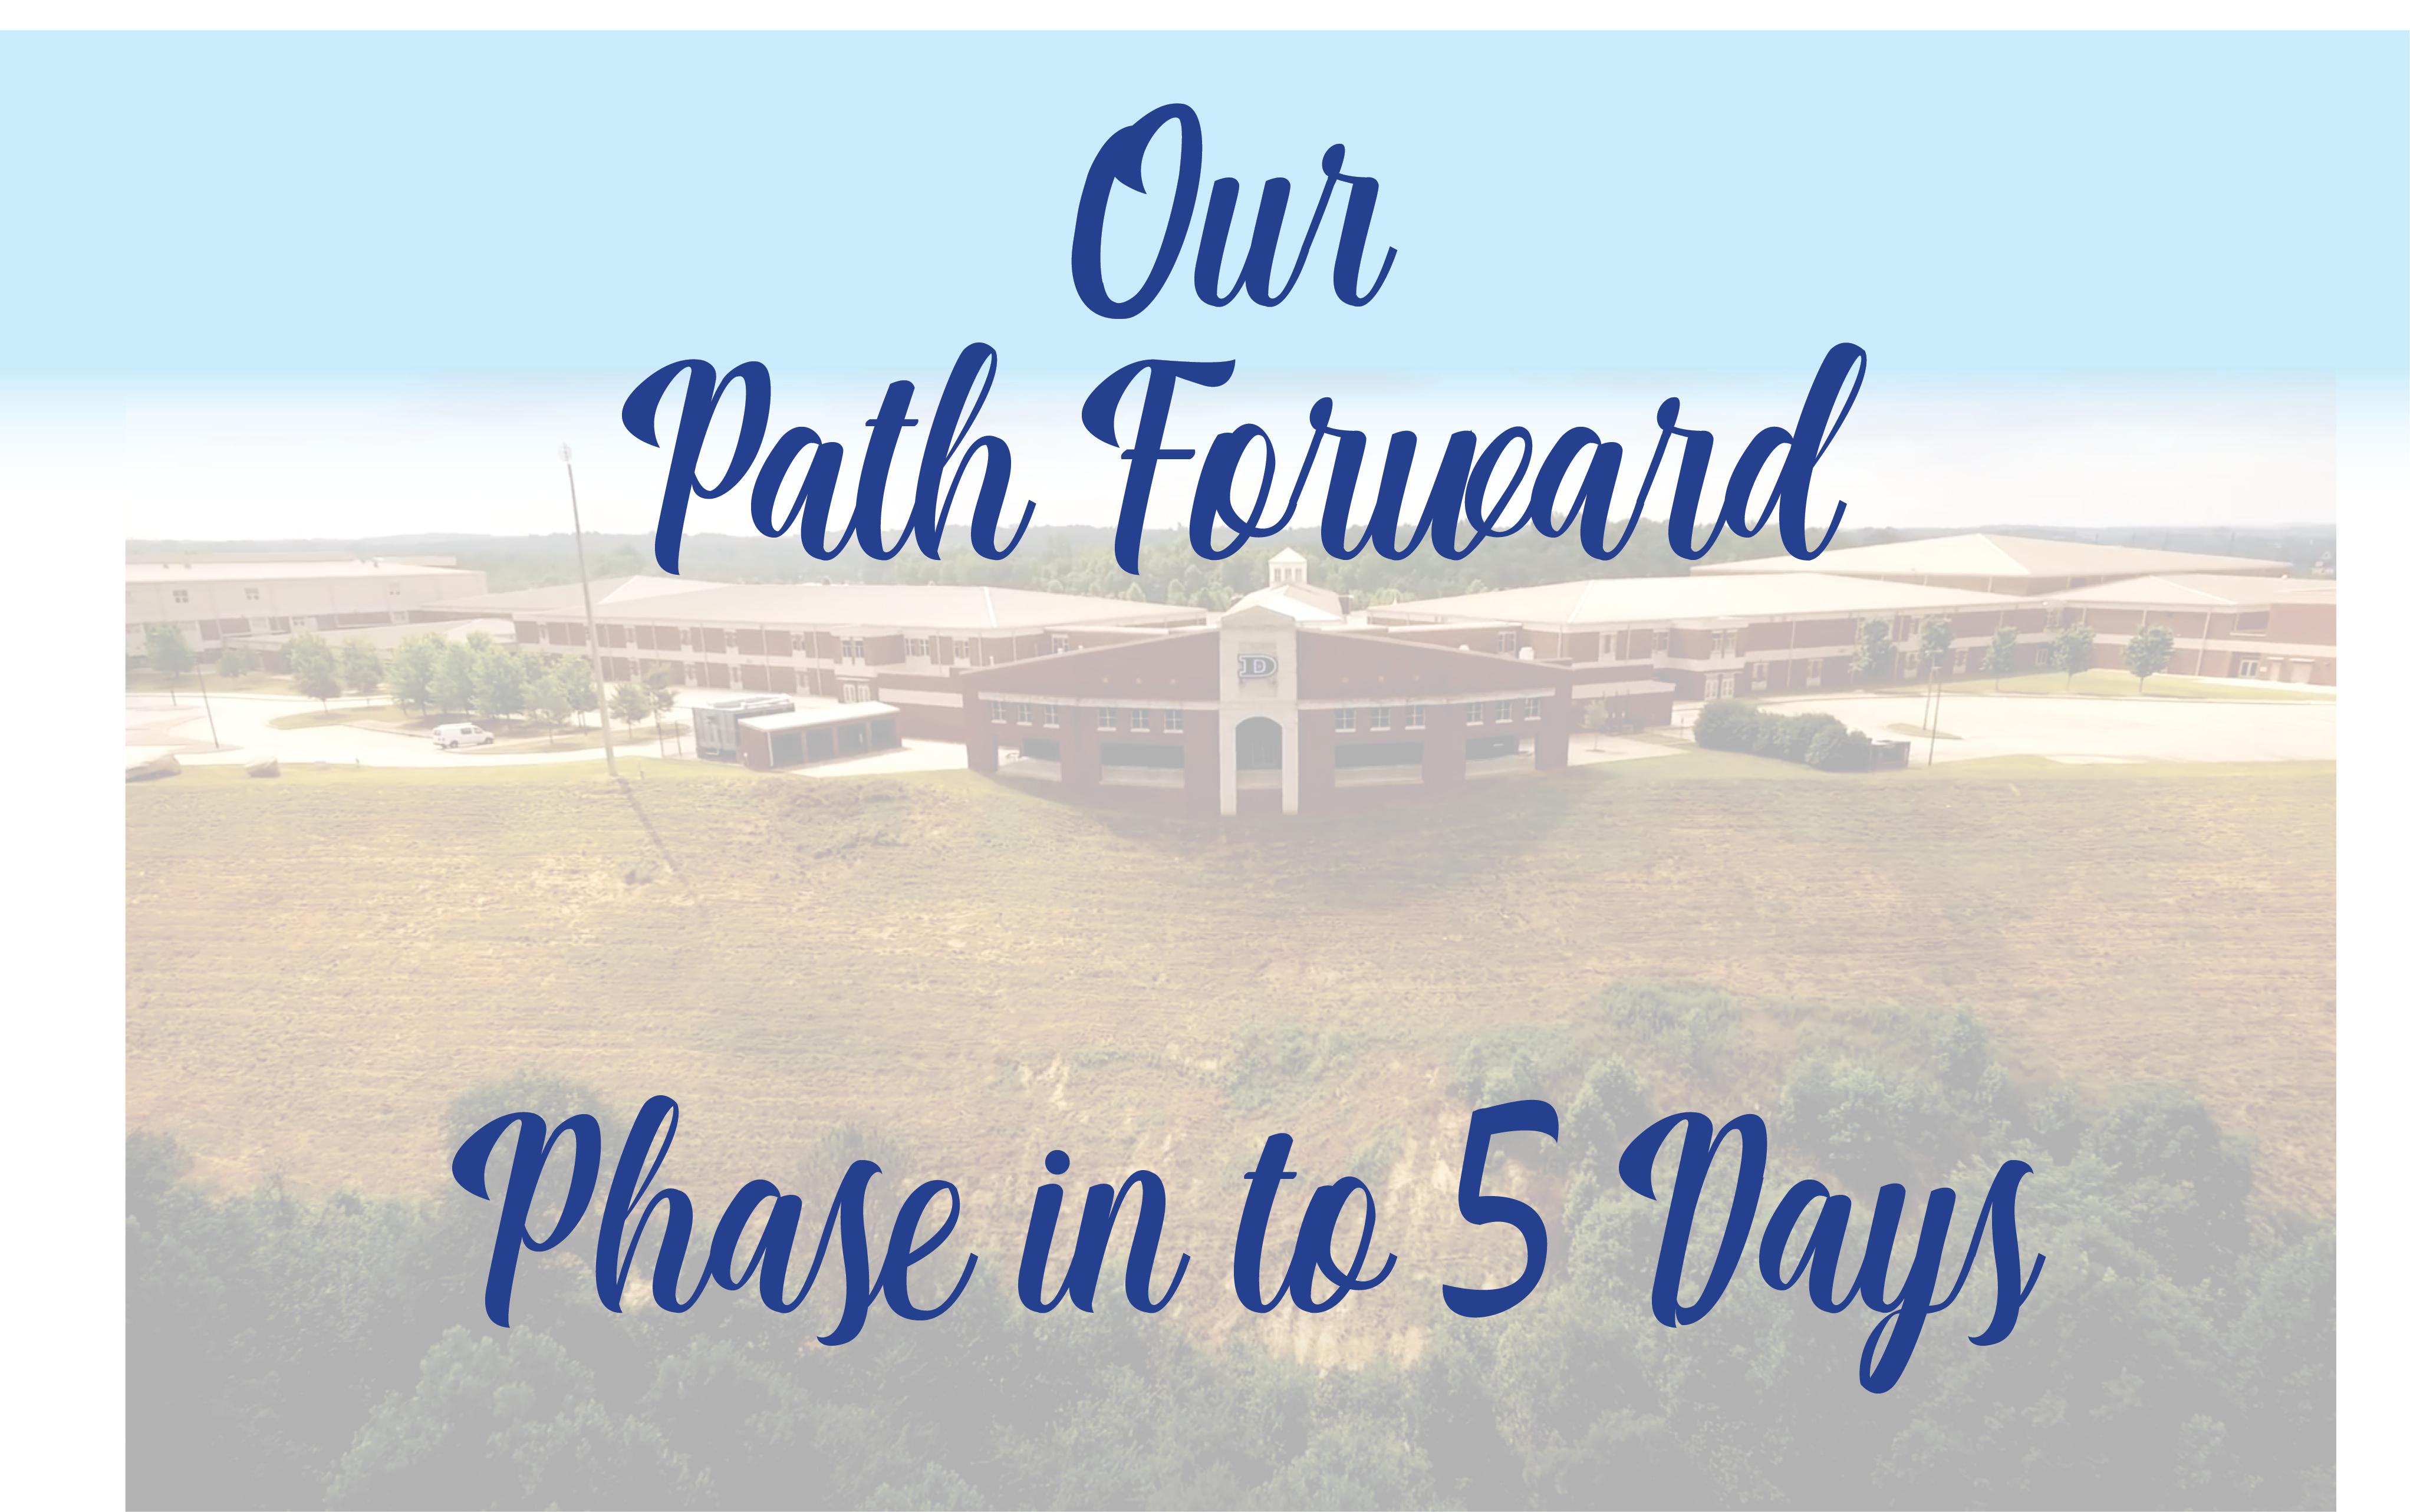 Our path forward - phase in to five days